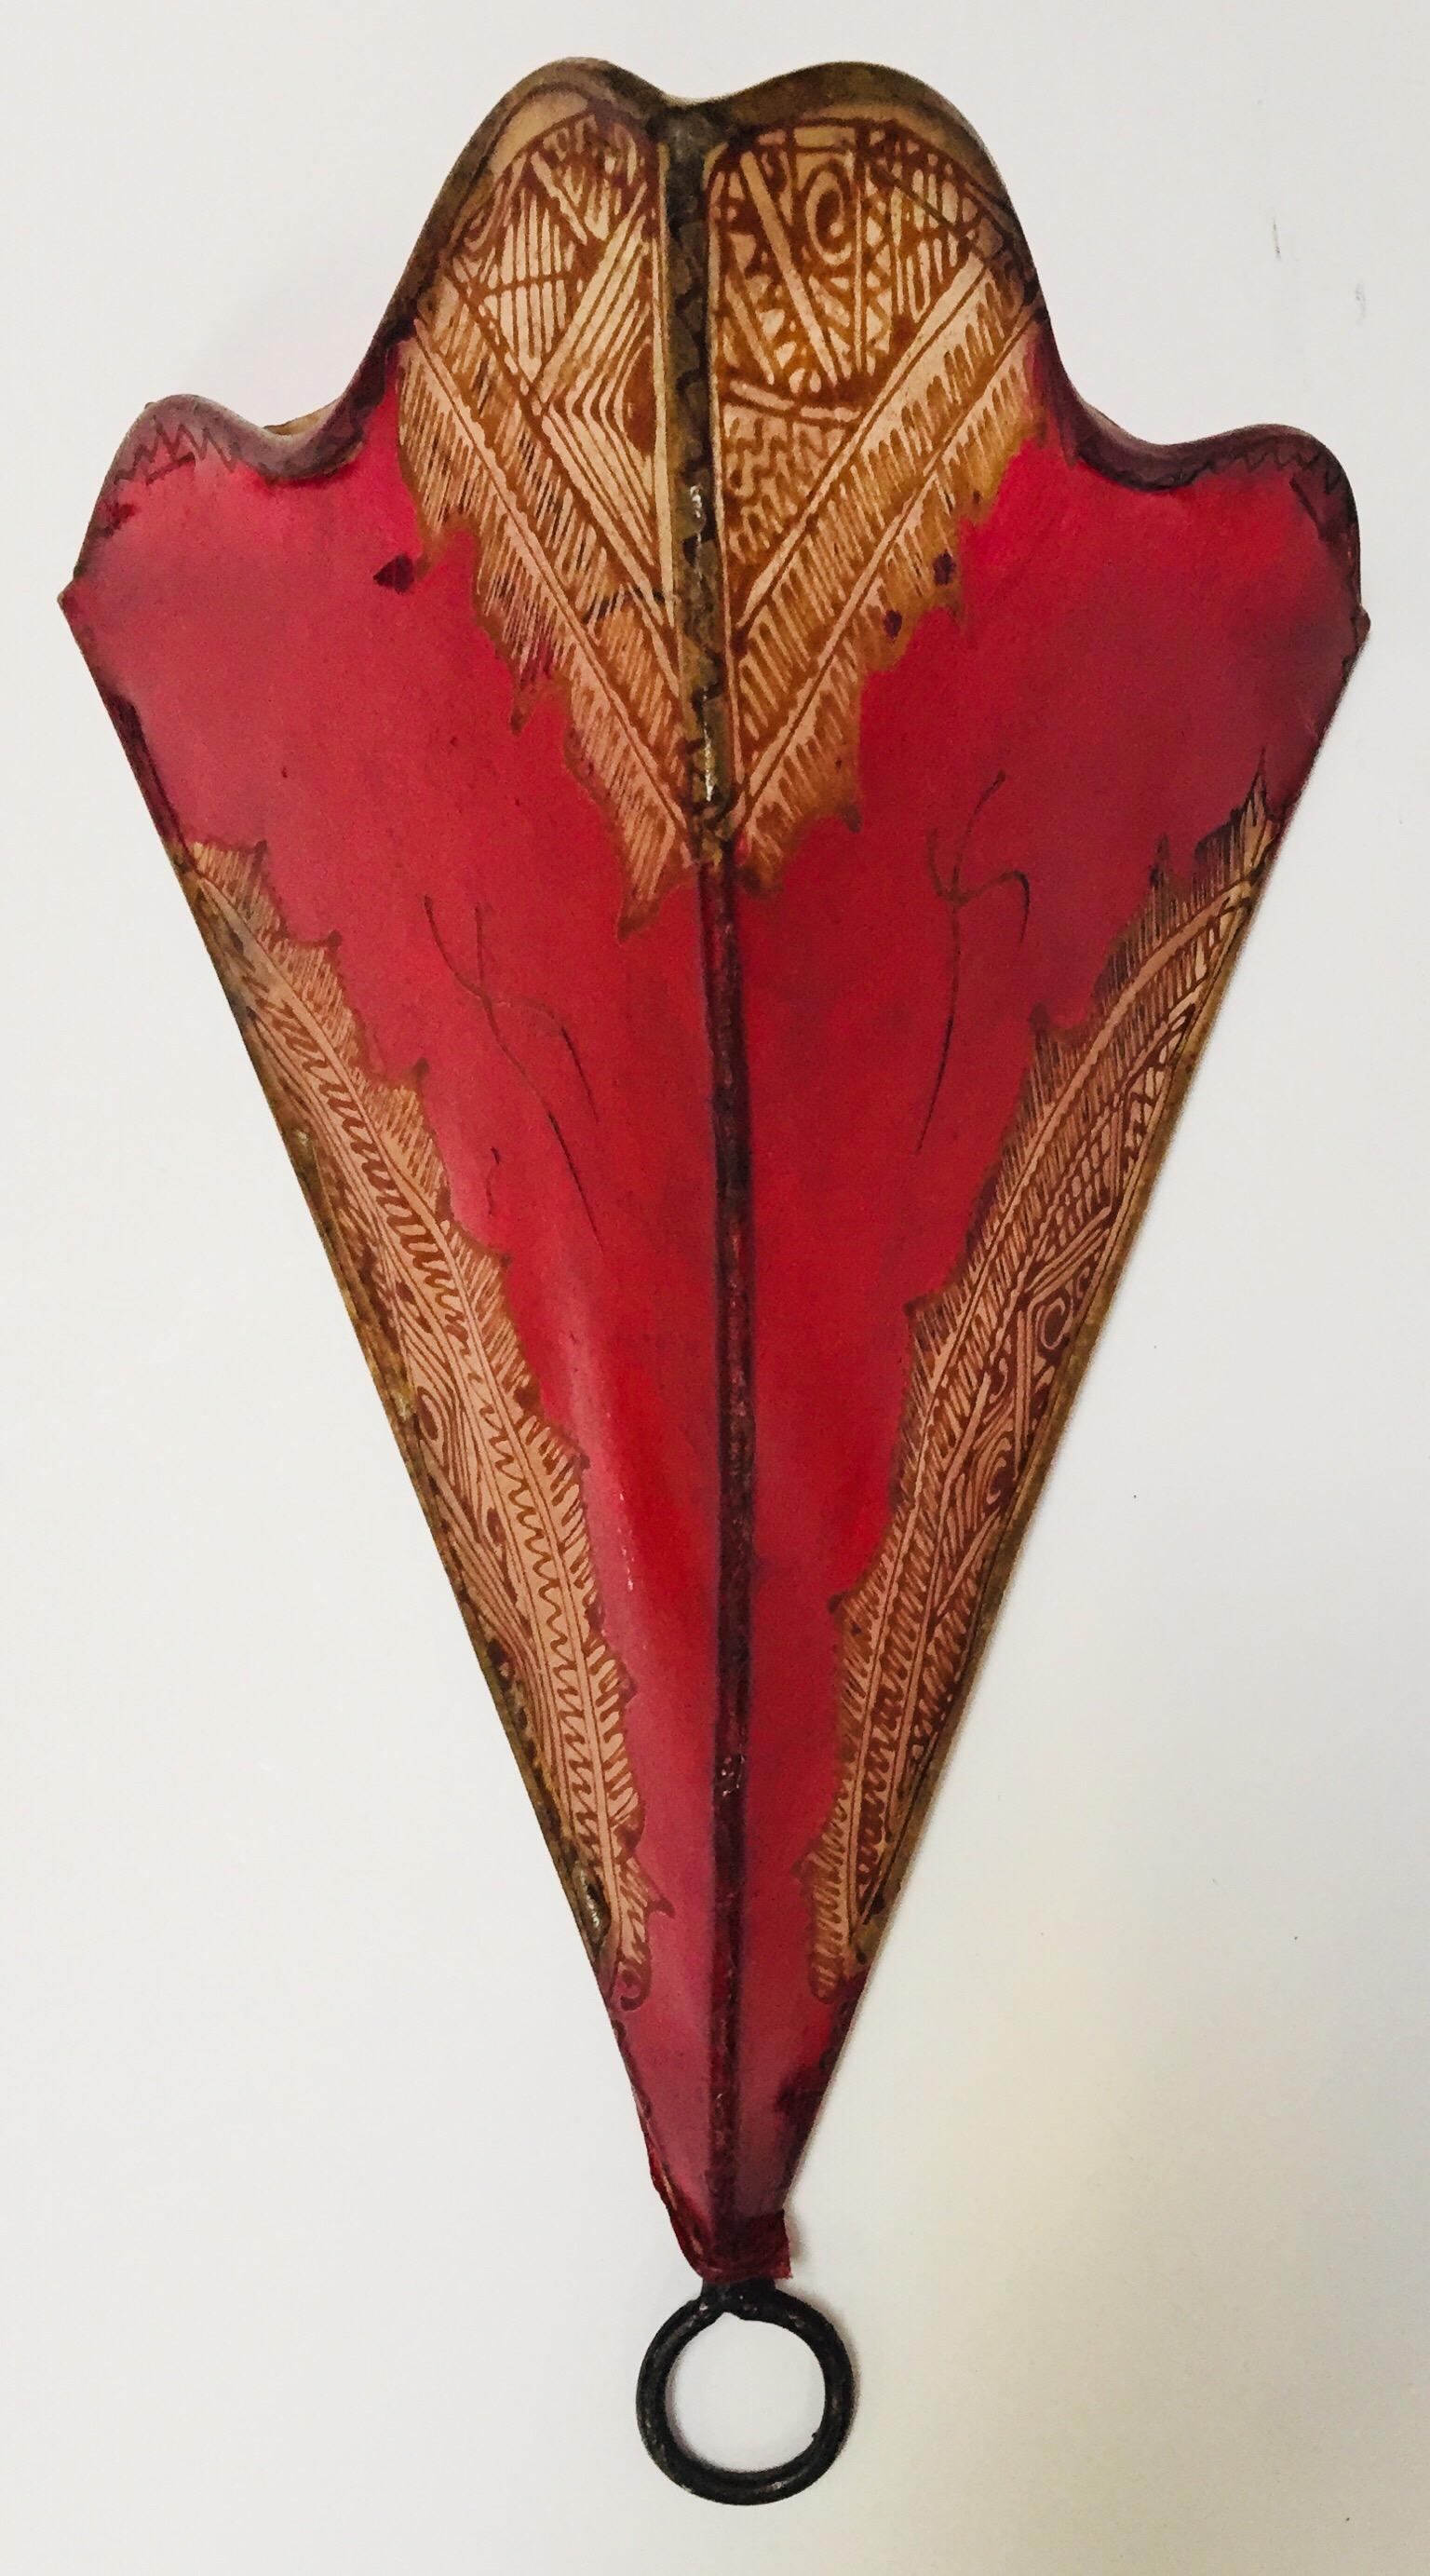 20th Century Pair of African Tribal Art Parchment Wall Shade Sconces in Red and Tan Colors